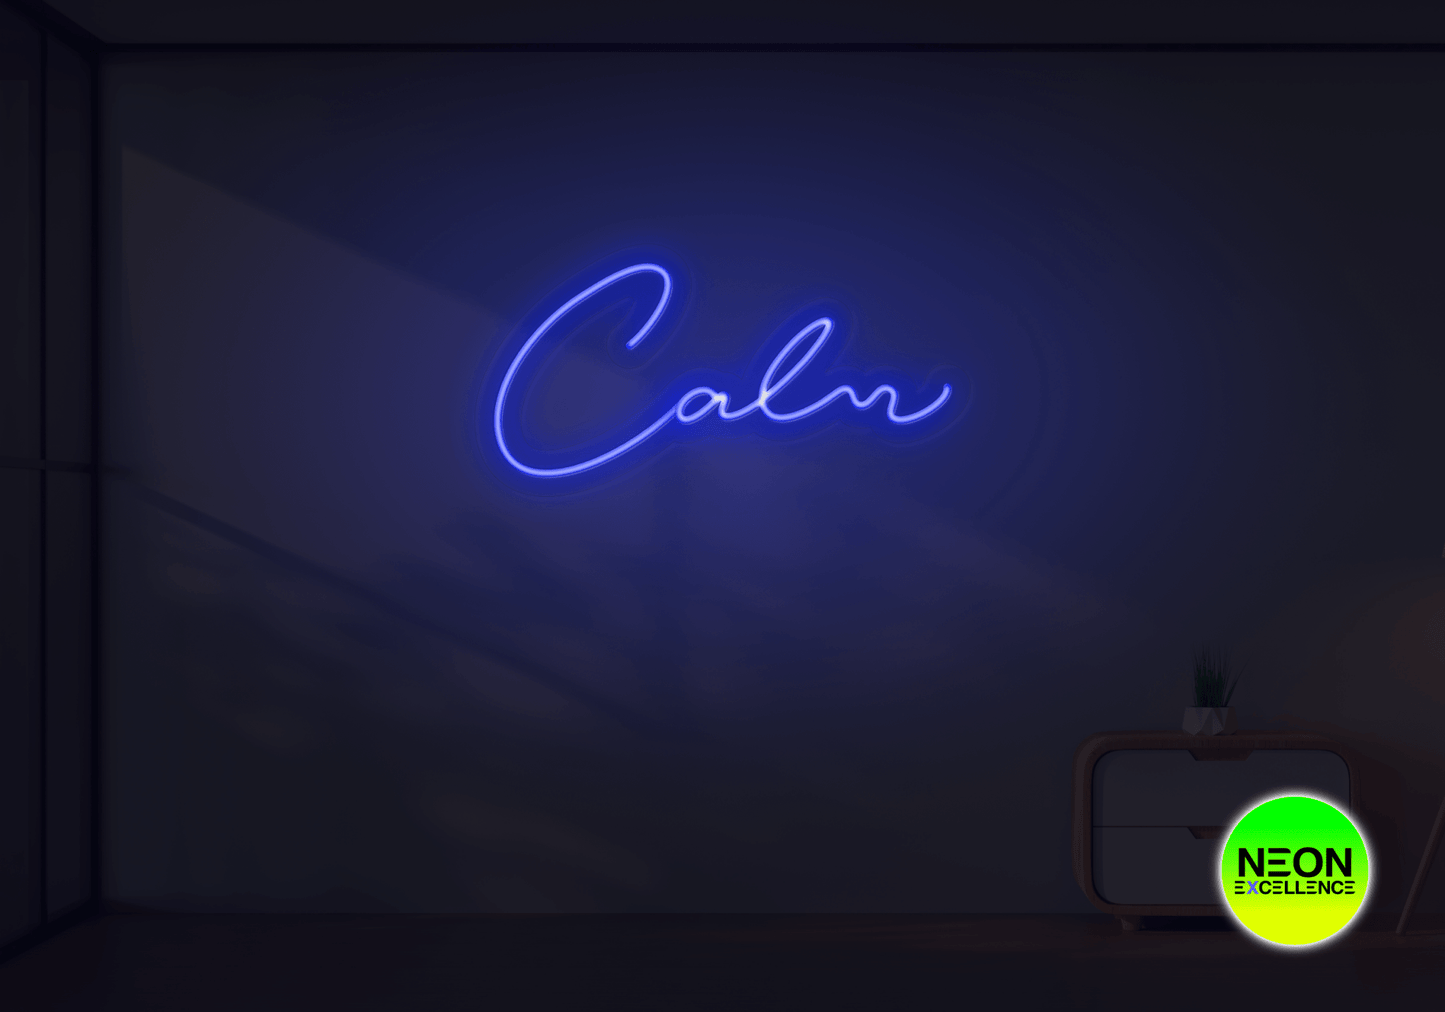 Calm LED Neon Sign - Neon Excellence